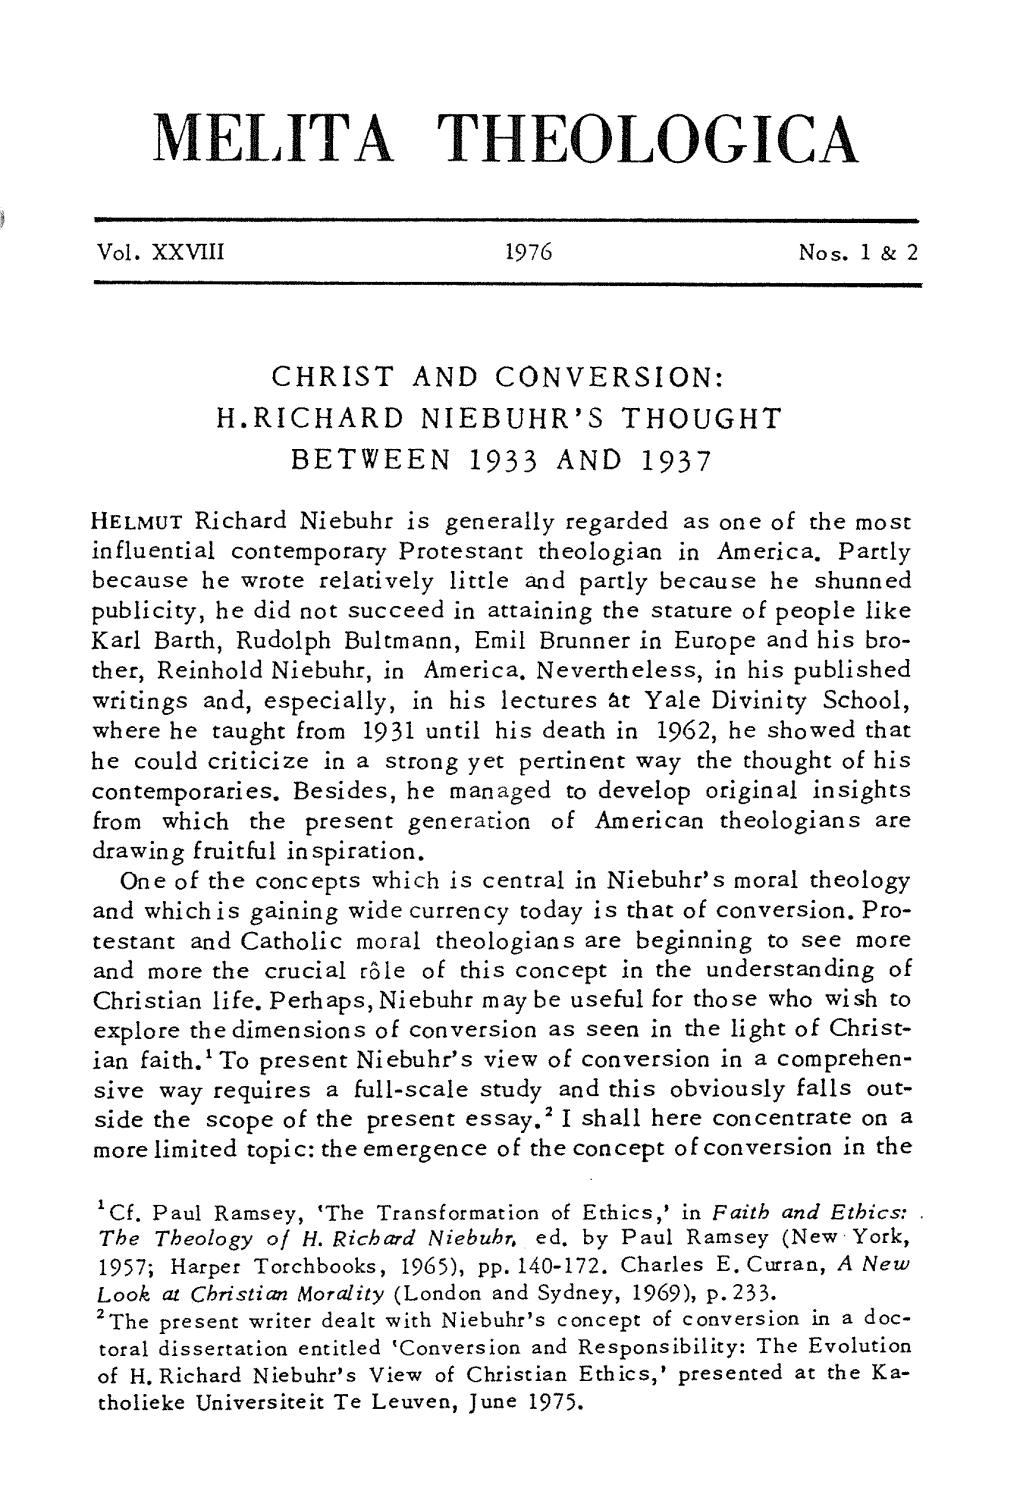 Christ and Conversion : H. Richard Niebuhr's Thought Between 1933